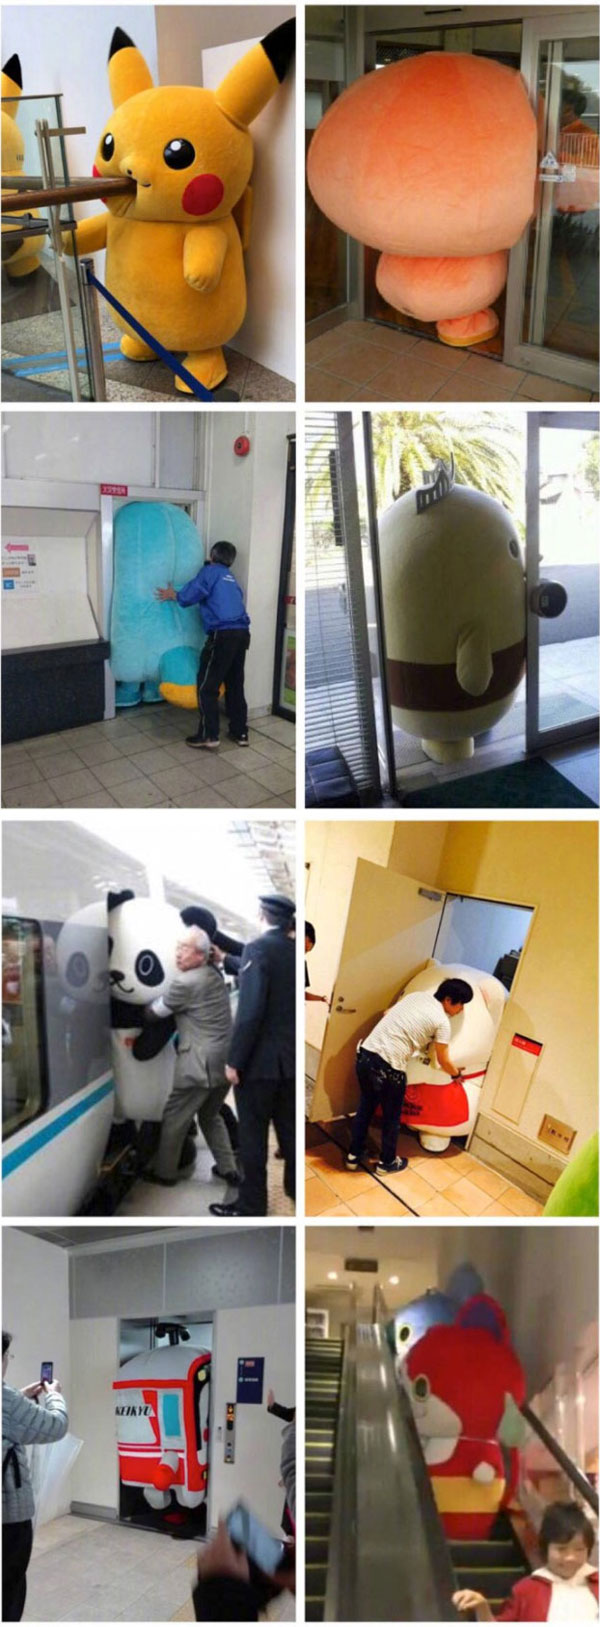 Japanese mascots getting stuck in things